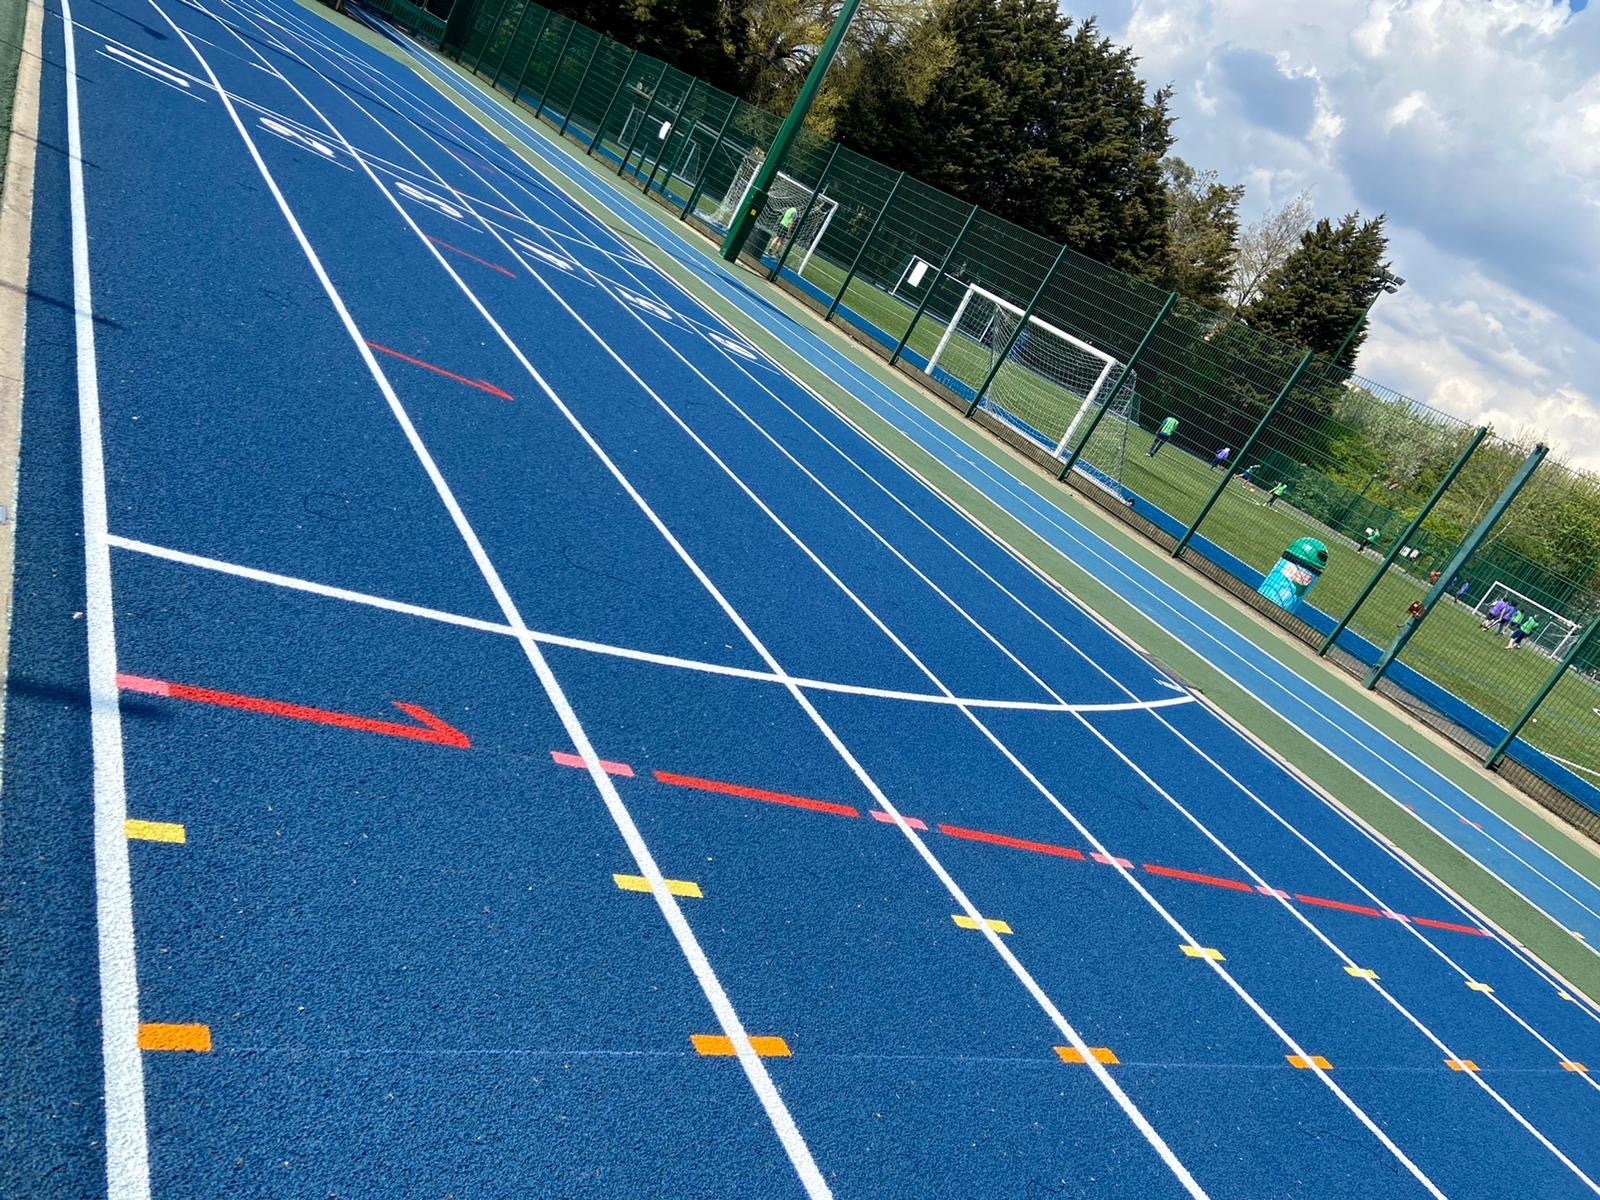 ETC Sports Surfaces Ltd had to sensitively manage laying the new running track surface adjacent to a 3G pitch in constant use by the public.